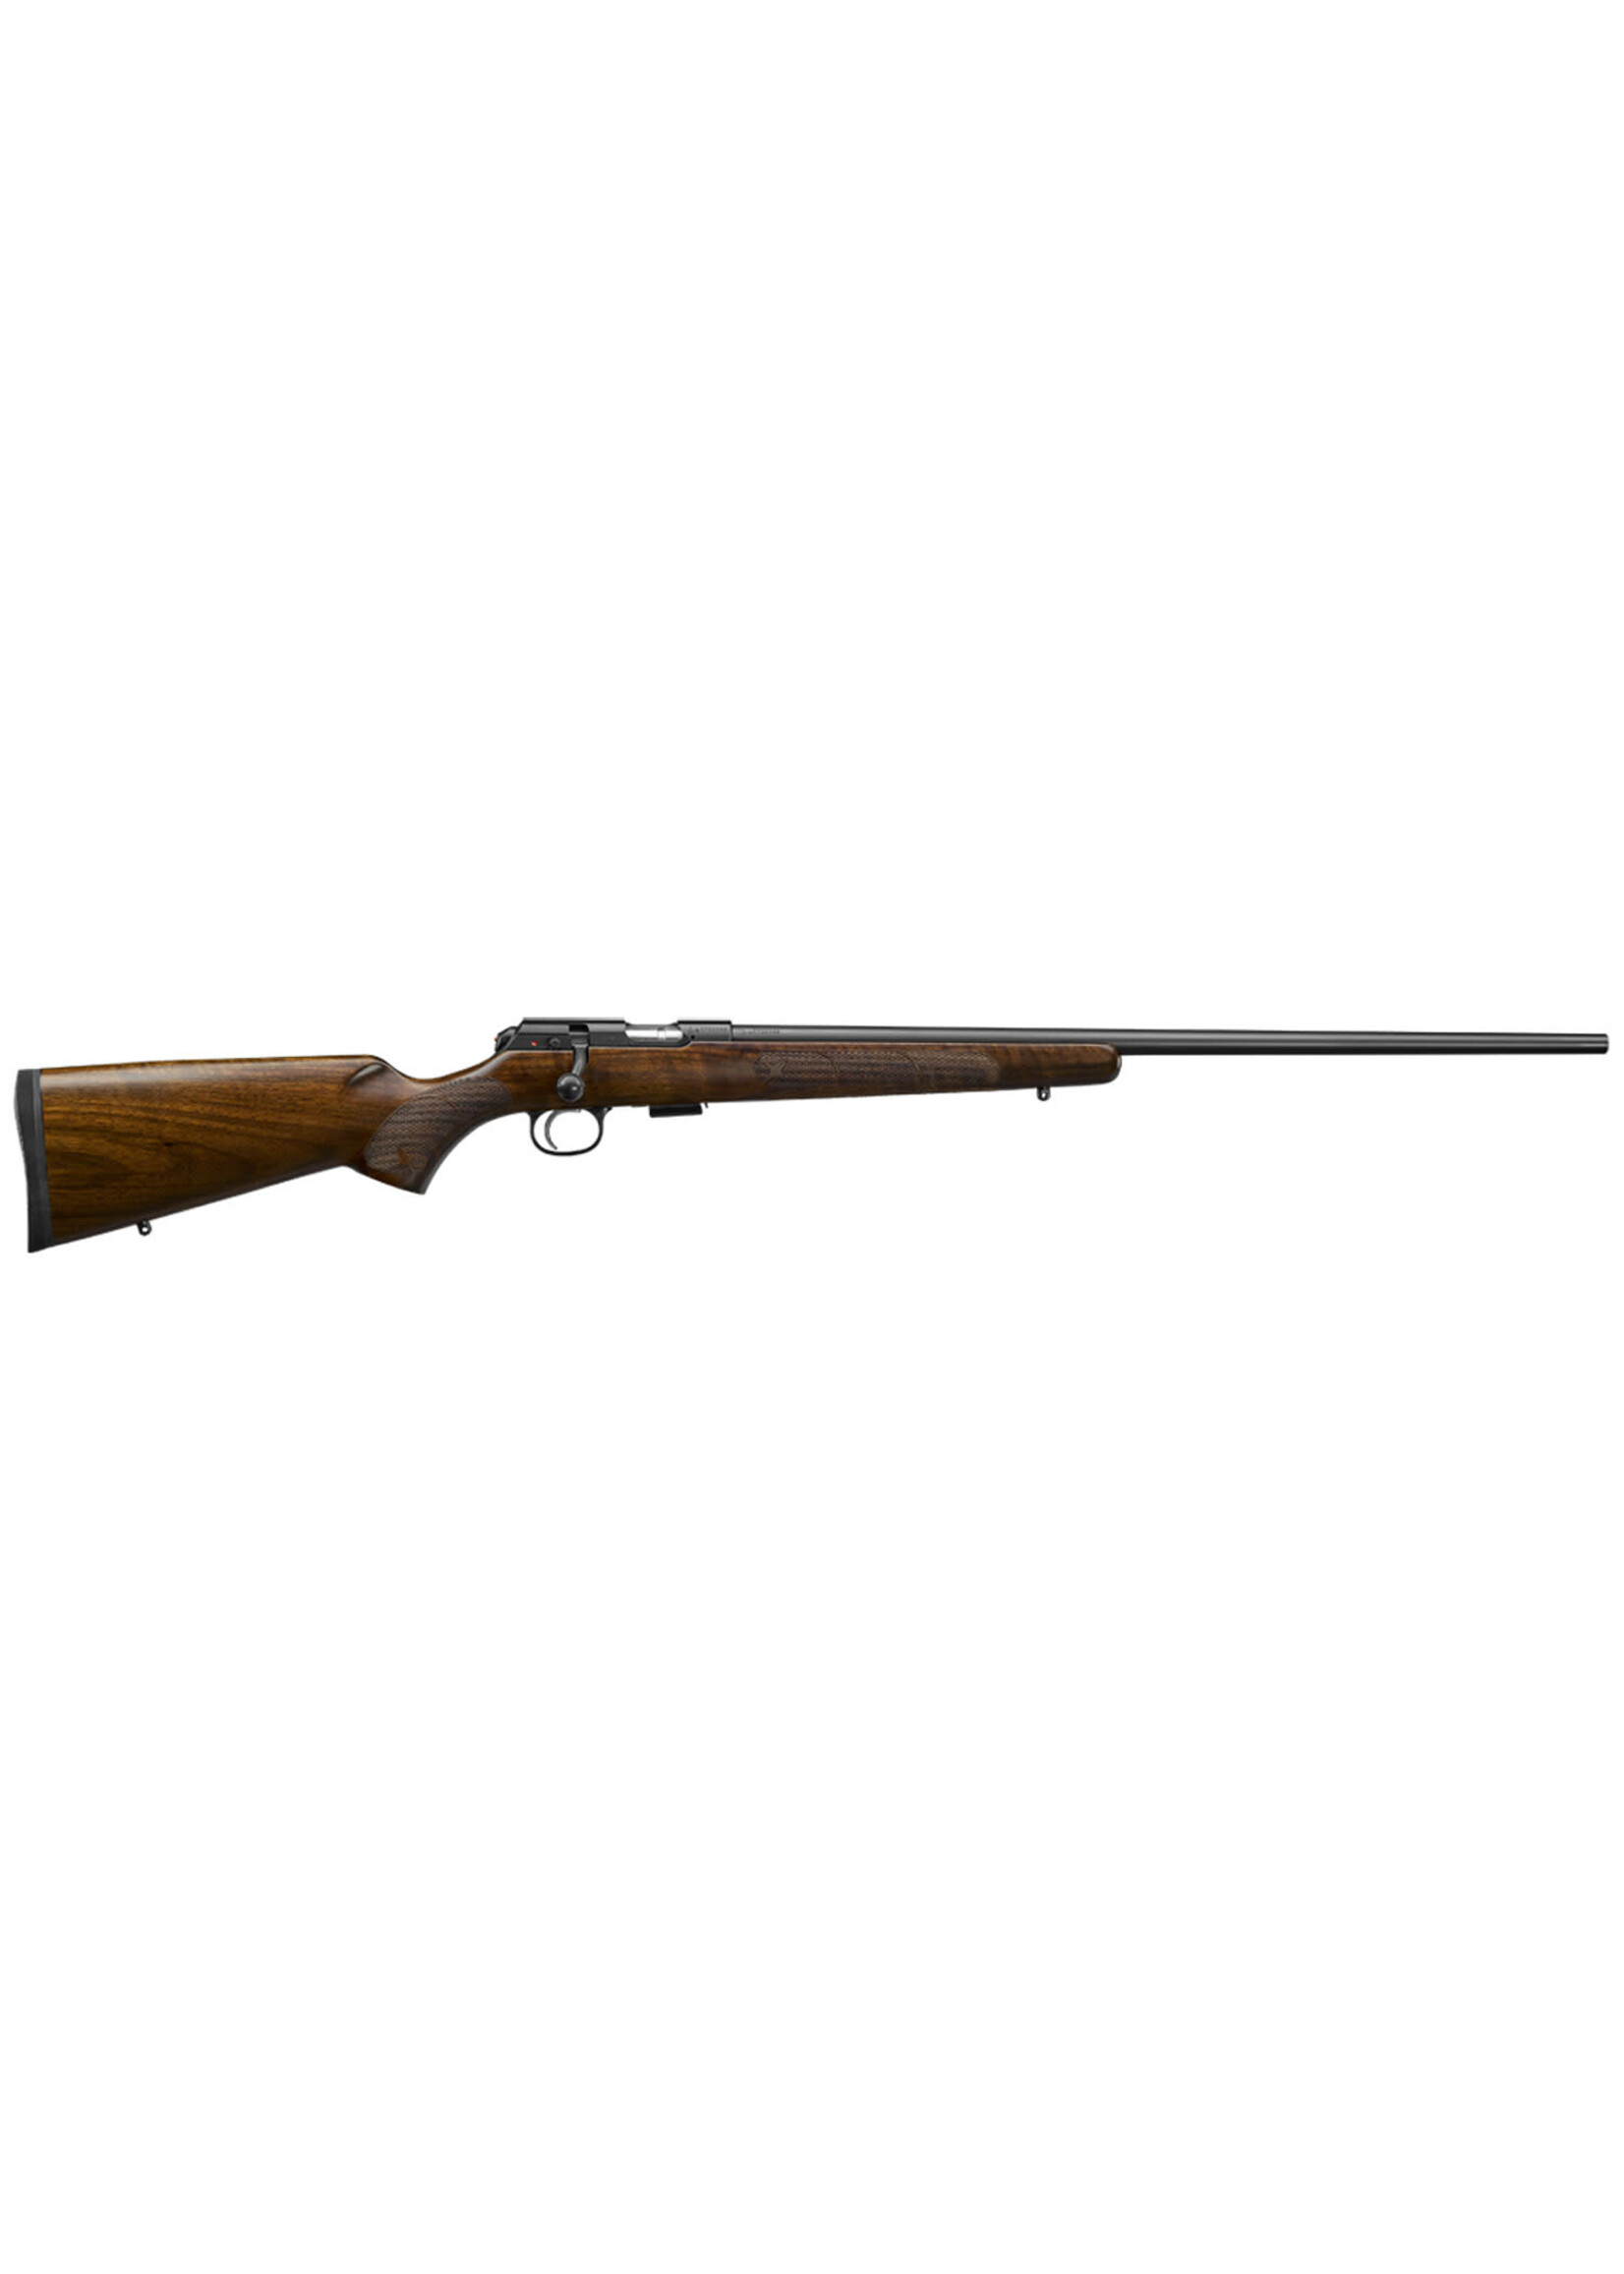 CZ USA SPECIAL ORDER CZ-USA 02311 CZ 457 American 22 WMR Caliber with 5+1 Capacity, 24" Barrel, Black Nitride Metal Finish & Fixed American-Style Turkish Walnut Stock, Right Hand (Full Size)